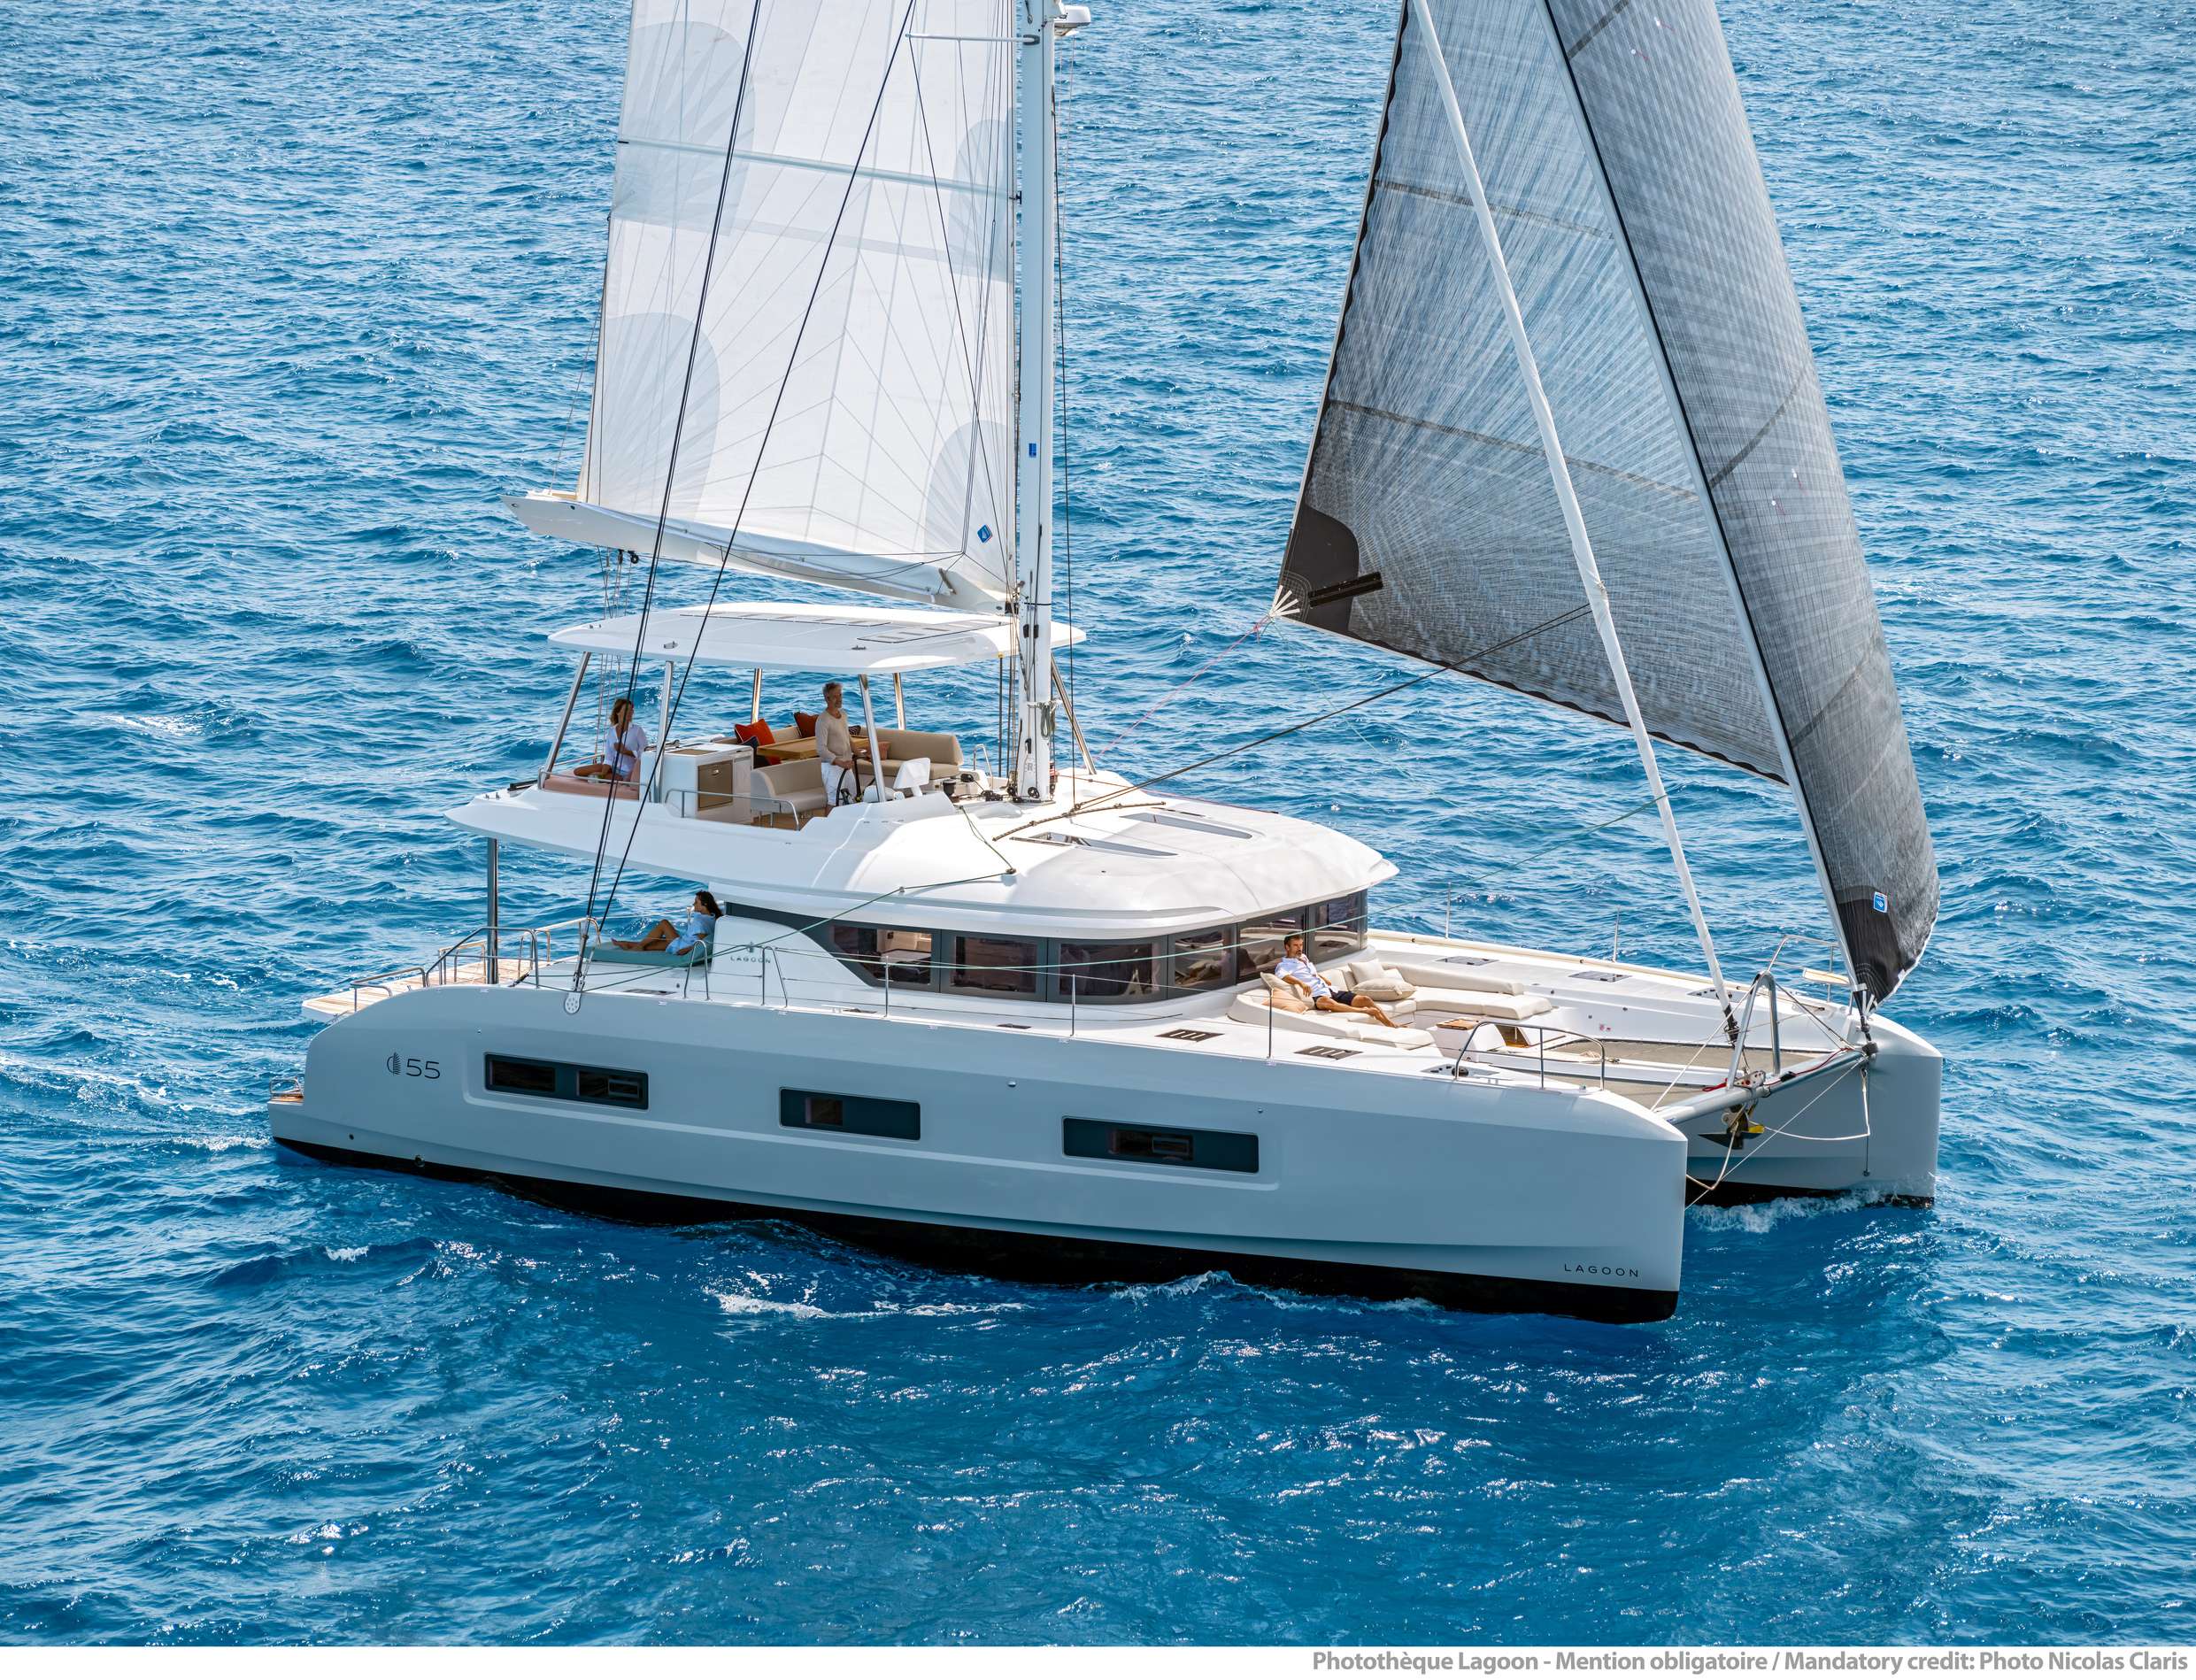 VALIUM 55 - Yacht Charter Naxos & Boat hire in Greece 1